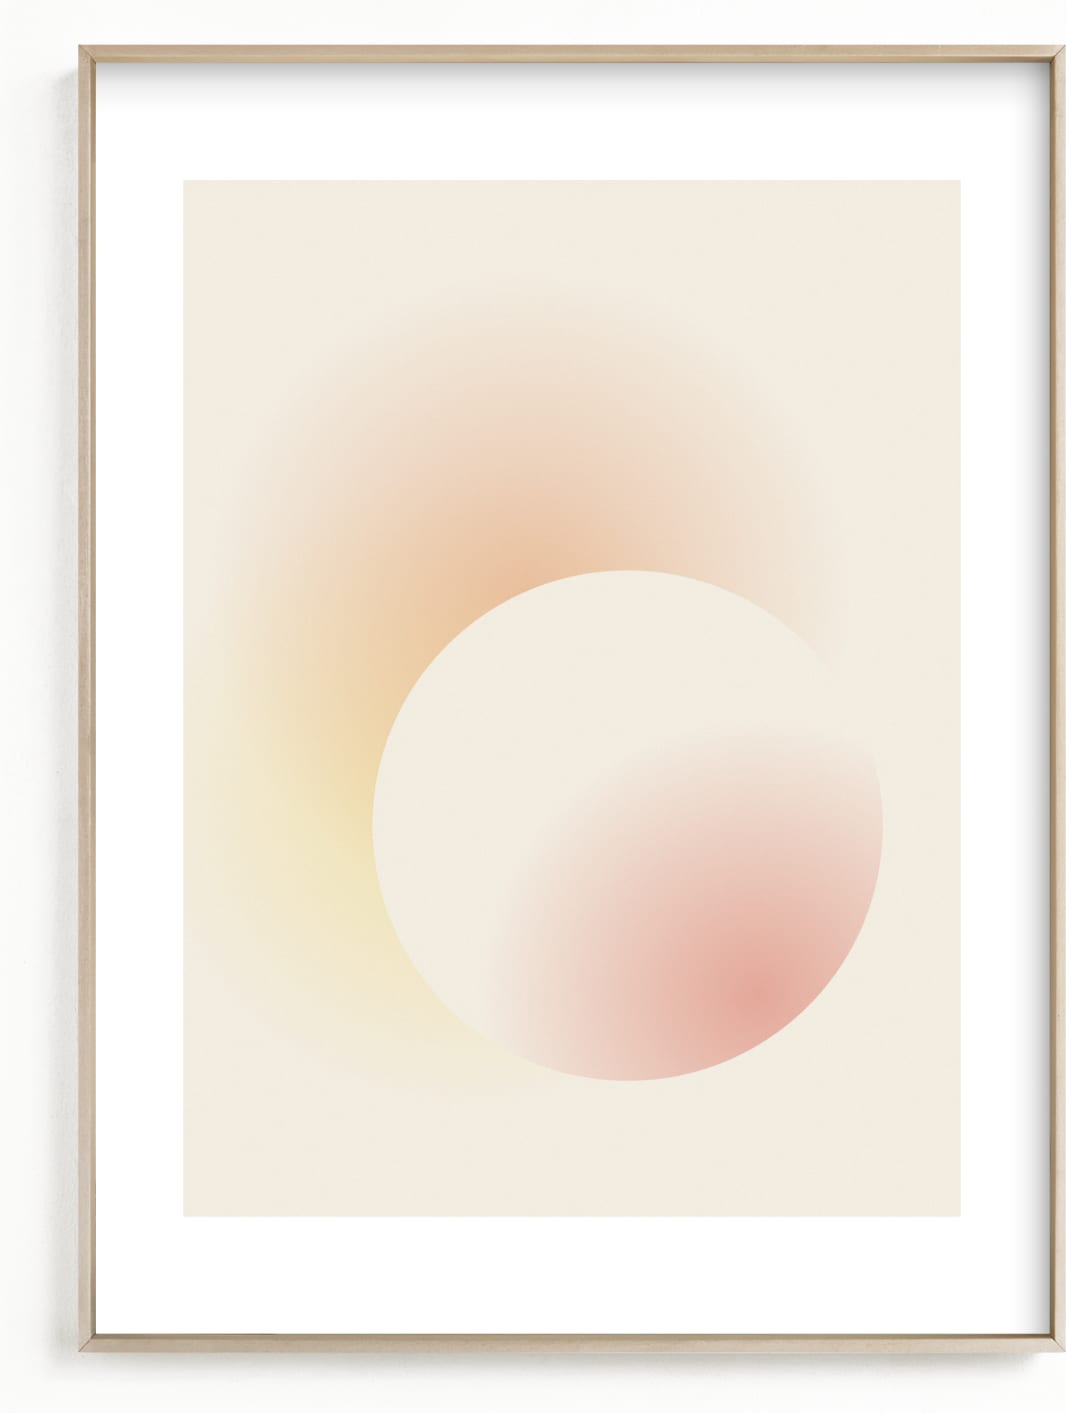 This is a yellow kids wall art by Sarah Lund called Light of the Sun.